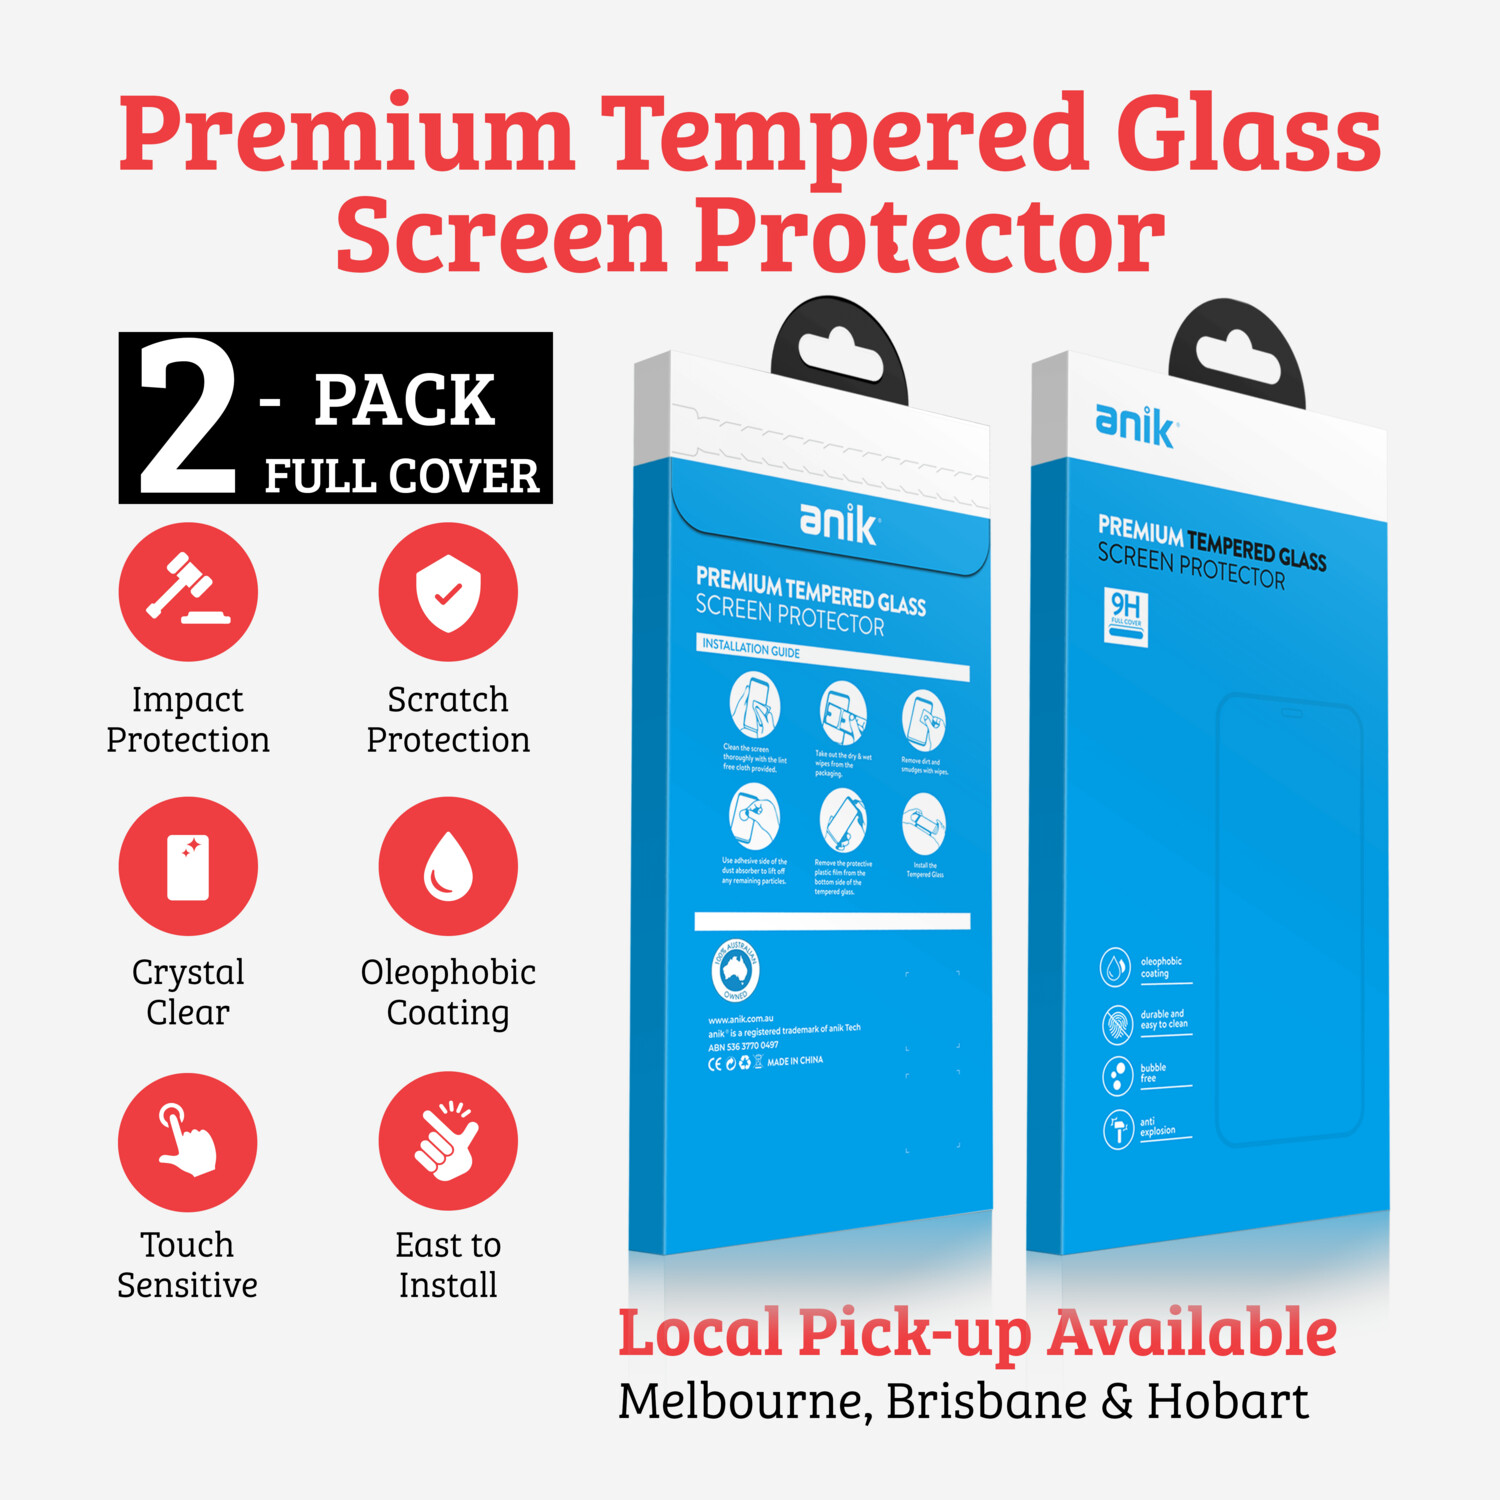 ANIK Premium Full Cover Tempered Glass Screen Protector for iPhone 11 Pro [2 Pack]